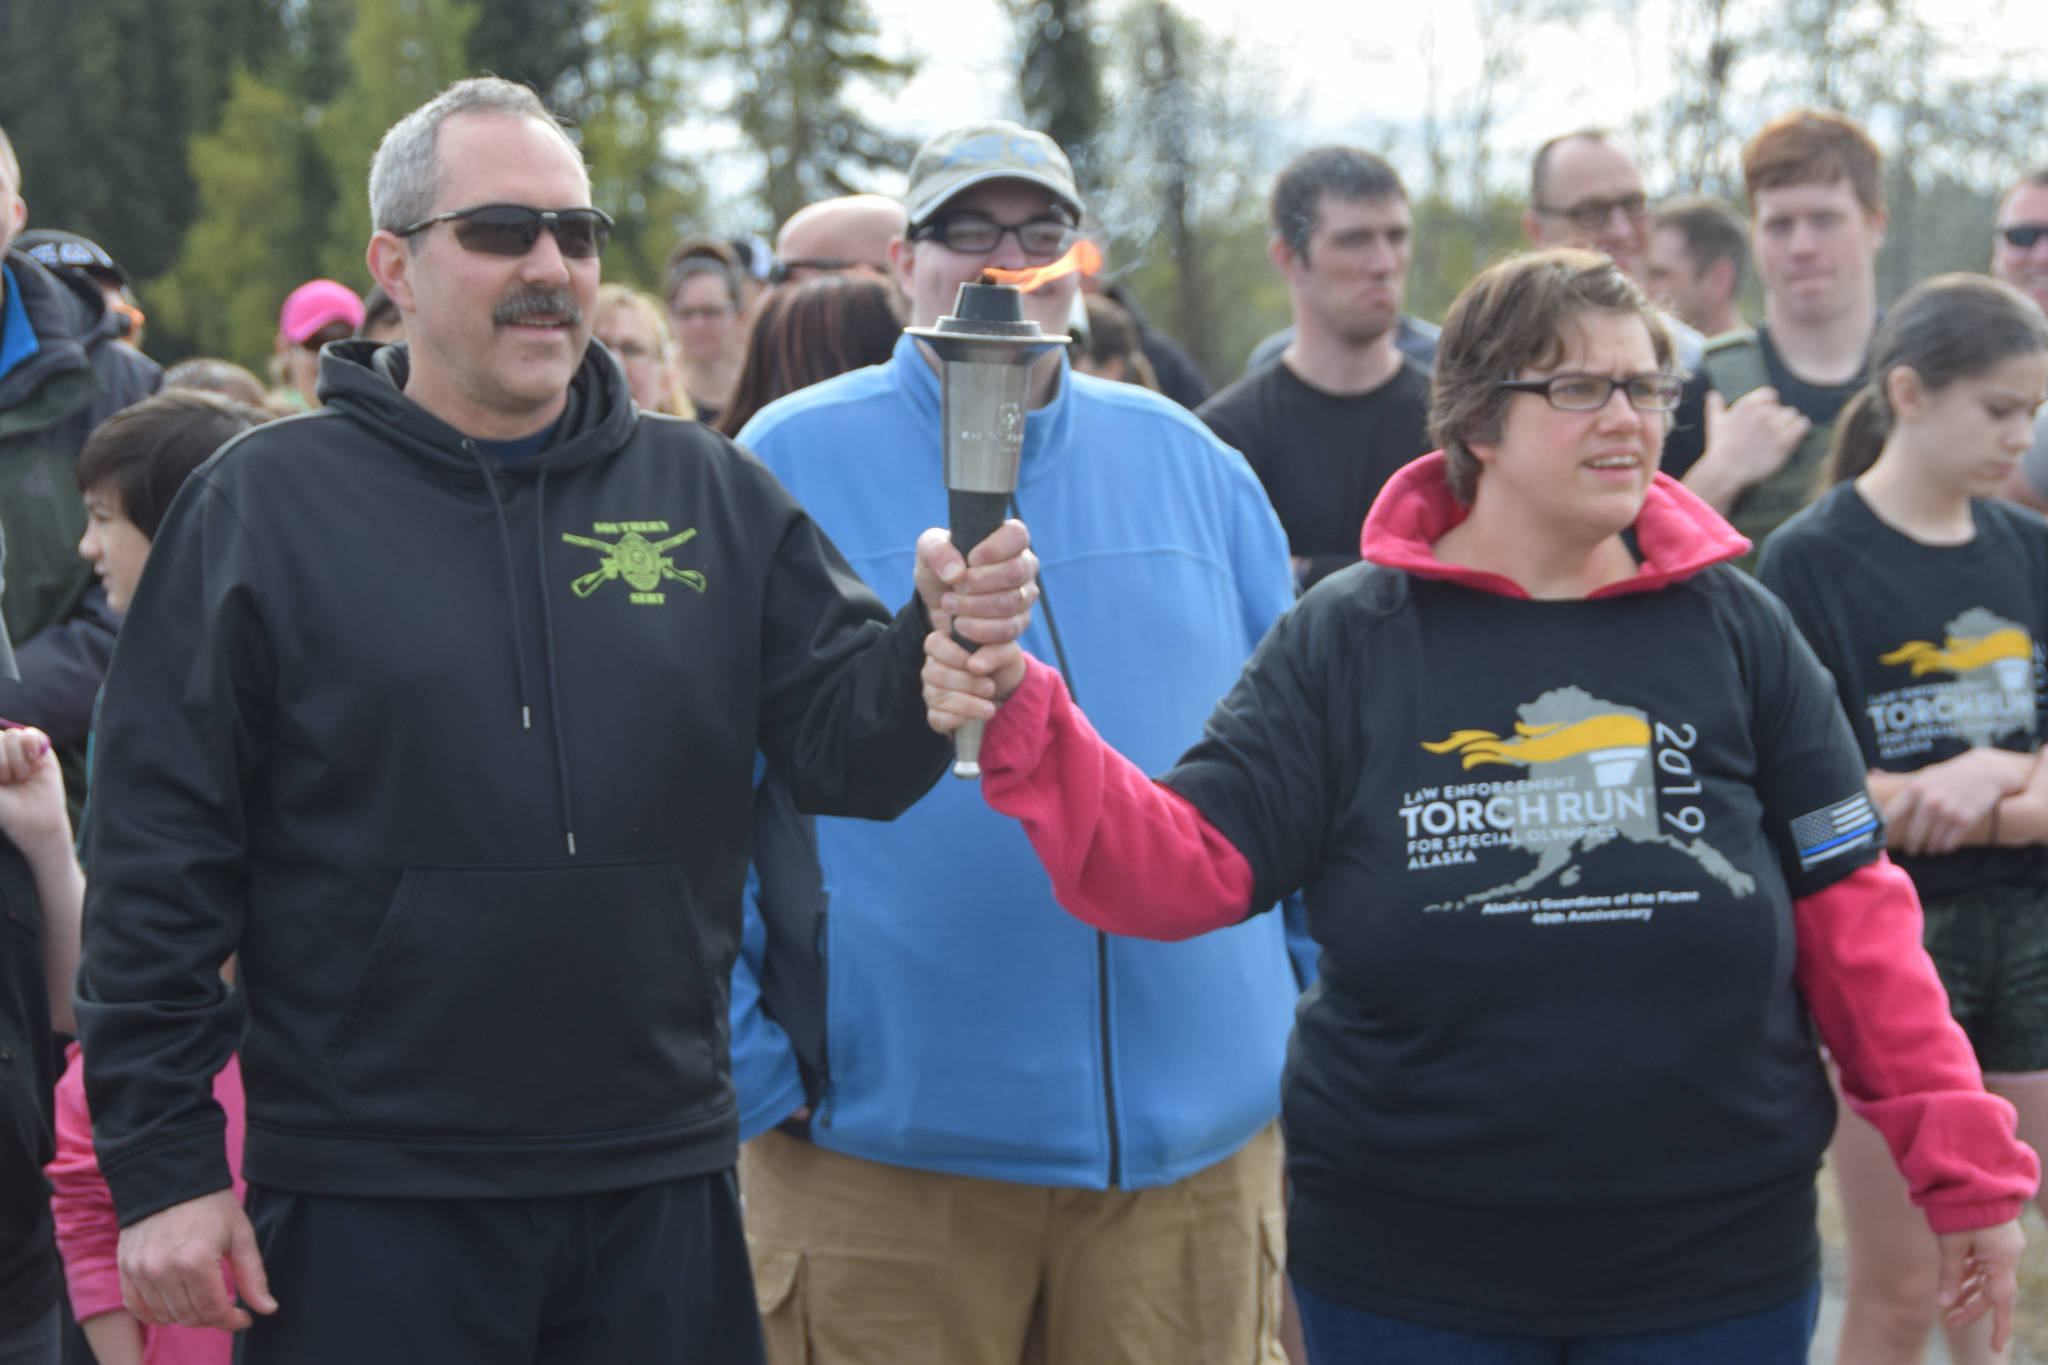 Local athletes and volunteers line up outside the Soldotna Regional Sports Complex to start the annual Special Olympics Torch Run in Soldotna, Alaska on May 18, 2019. (Photo by Brian Mazurek/Peninsula Clarion)